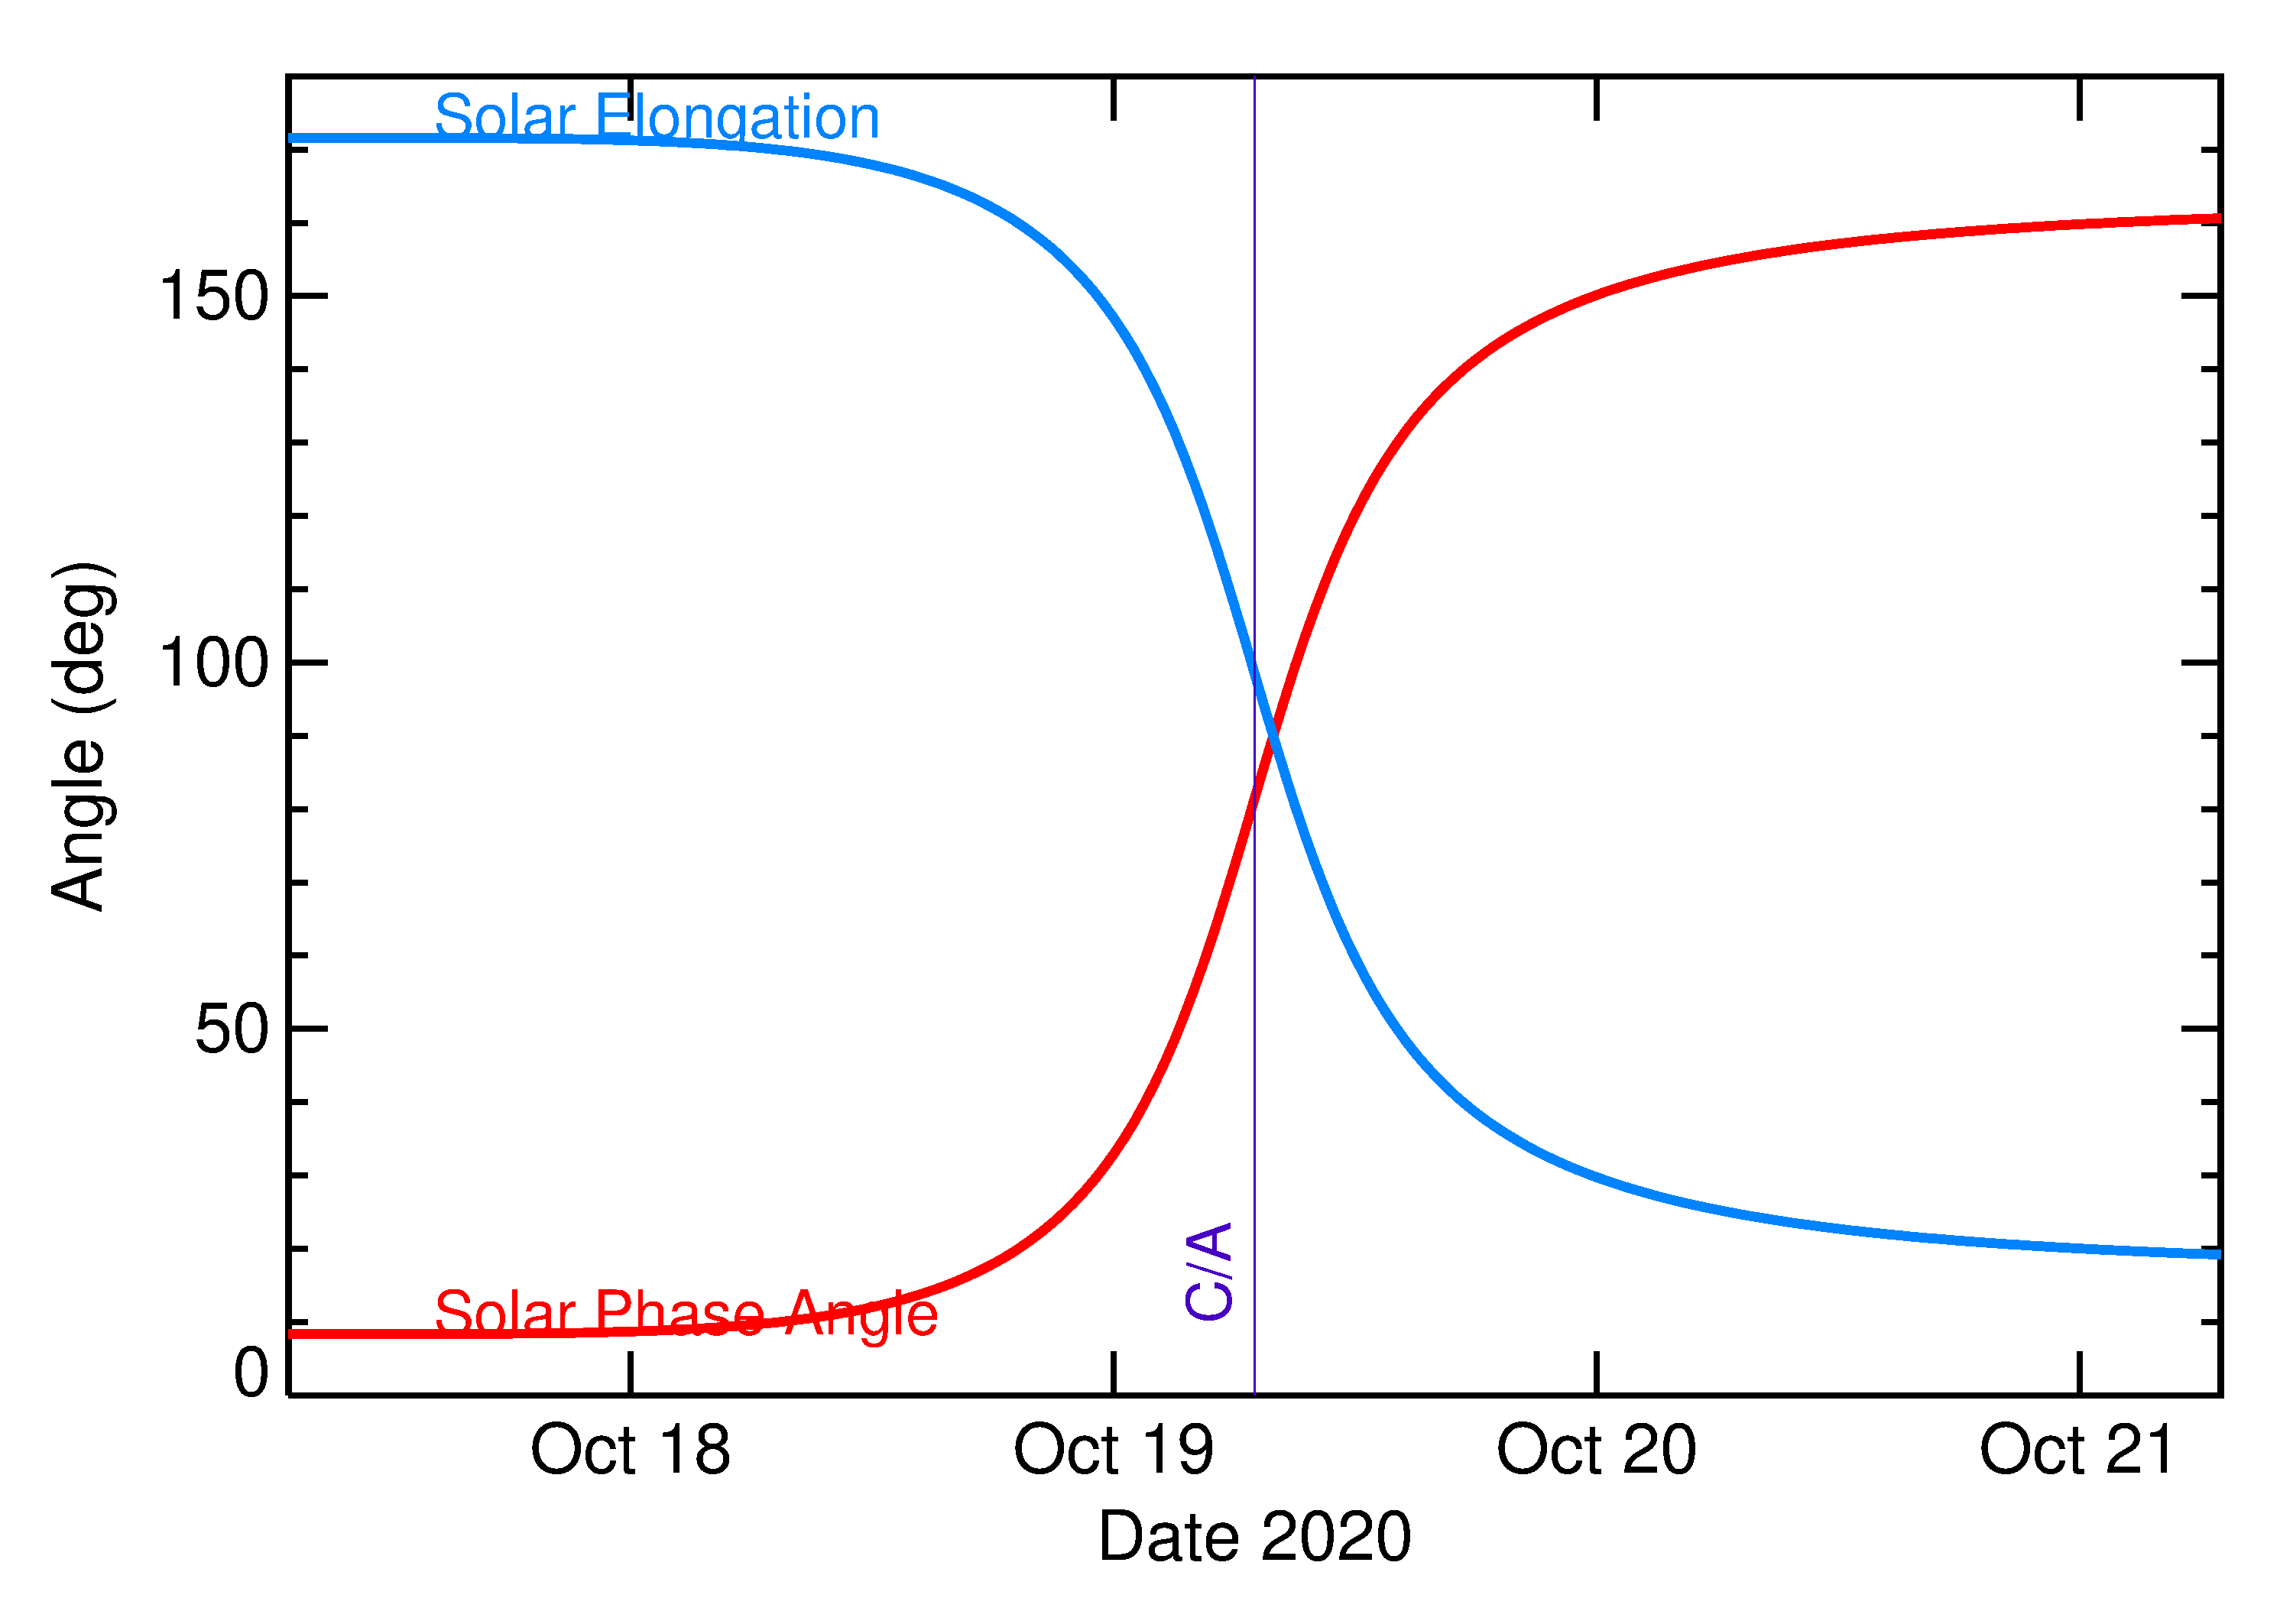 Solar Elongation and Solar Phase Angle of 2020 UX in the days around closest approach